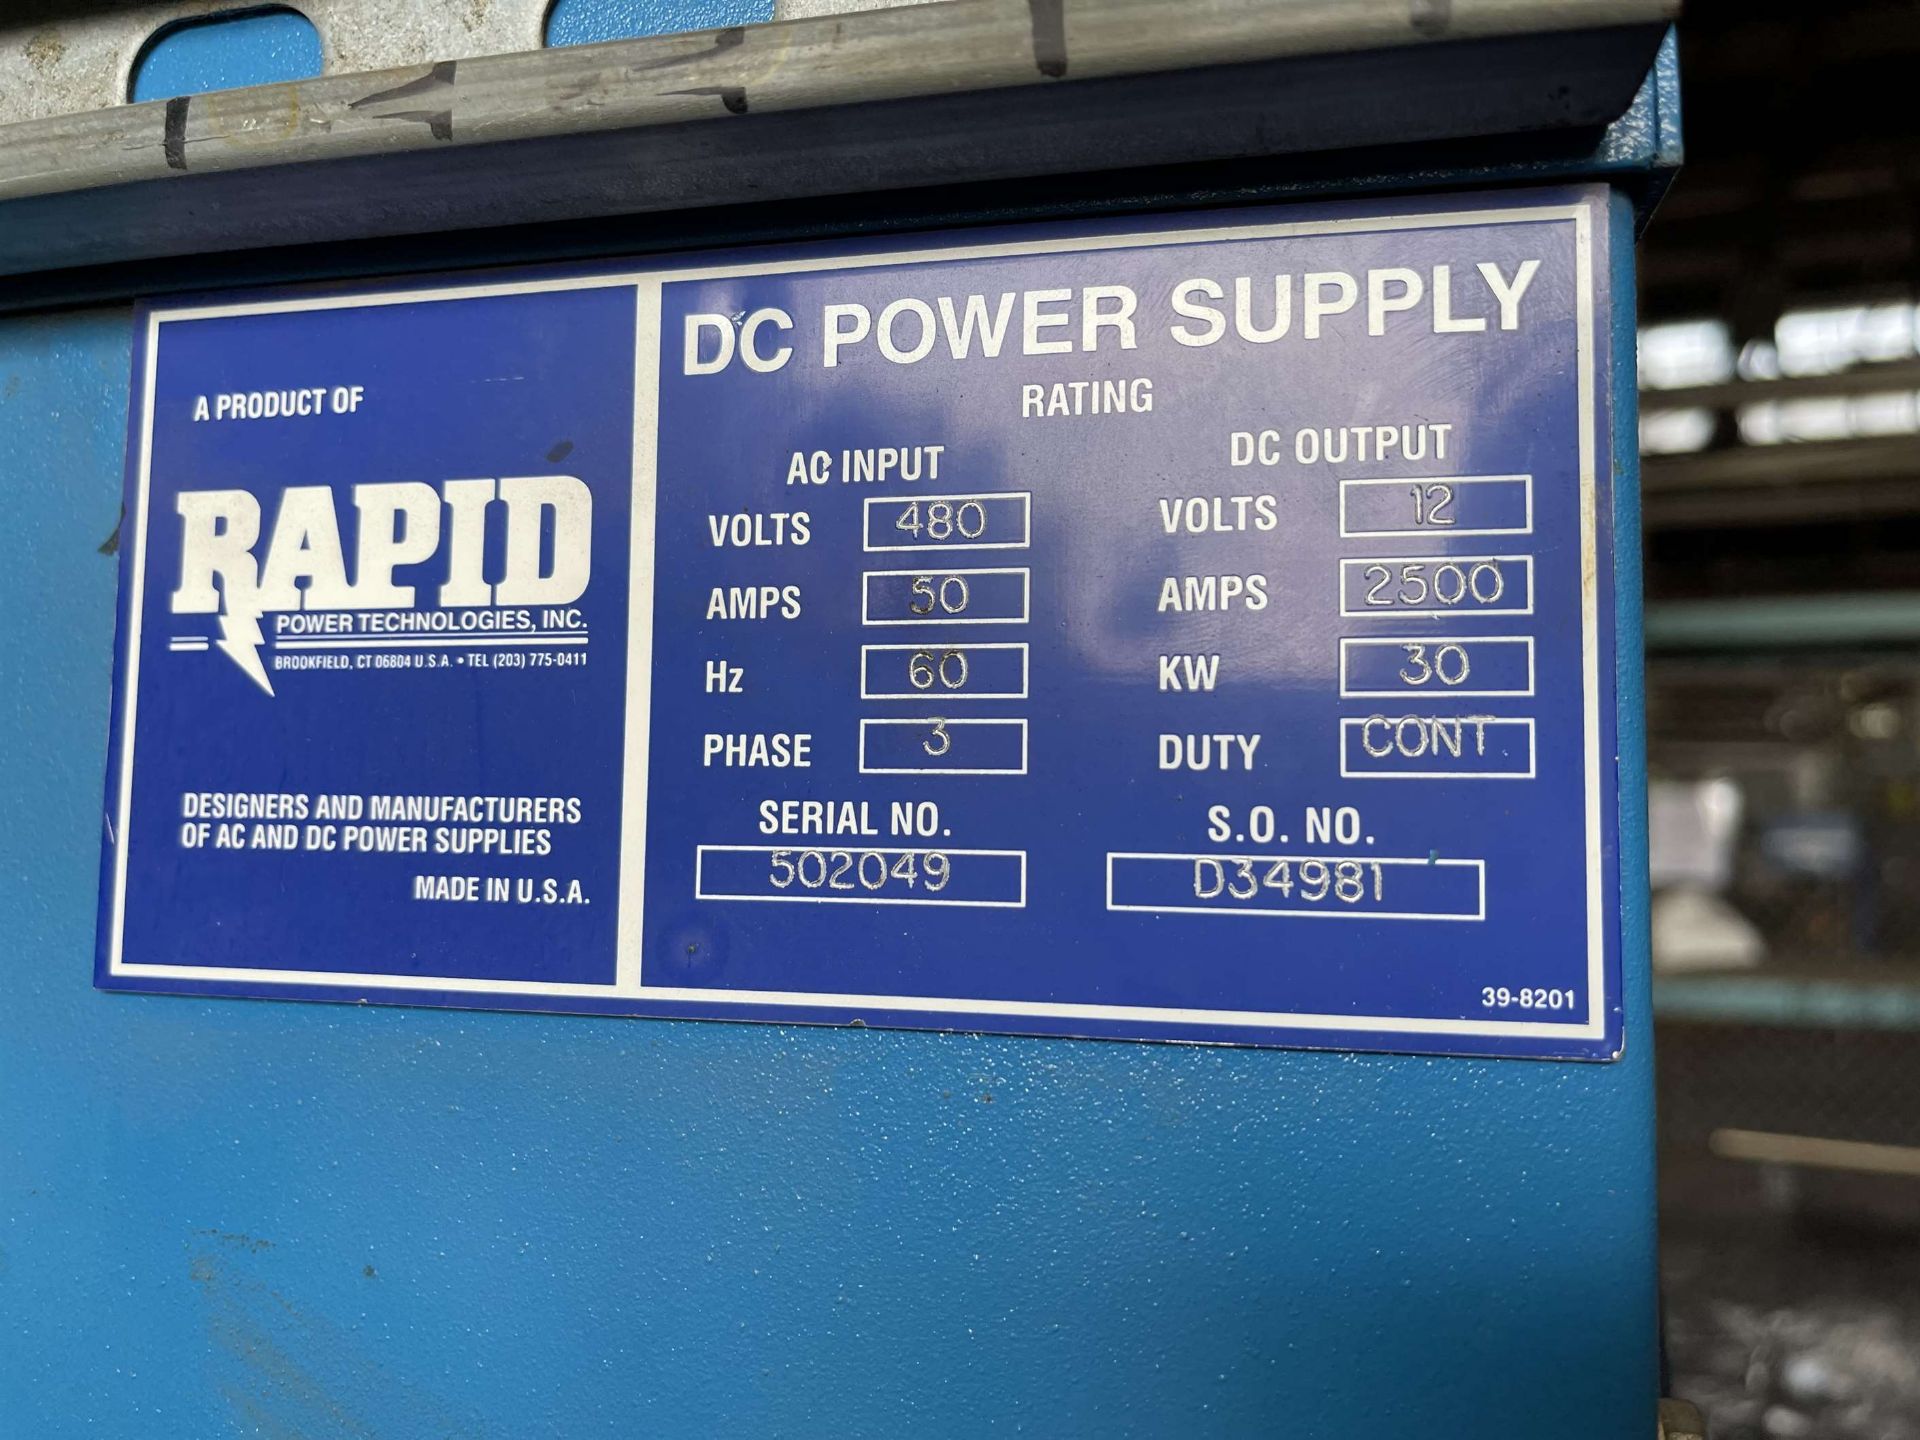 RAPID POWER TECHNOLOGIES 2500 Amp DC Power Supply, s/n 502049, 12V - Image 9 of 9